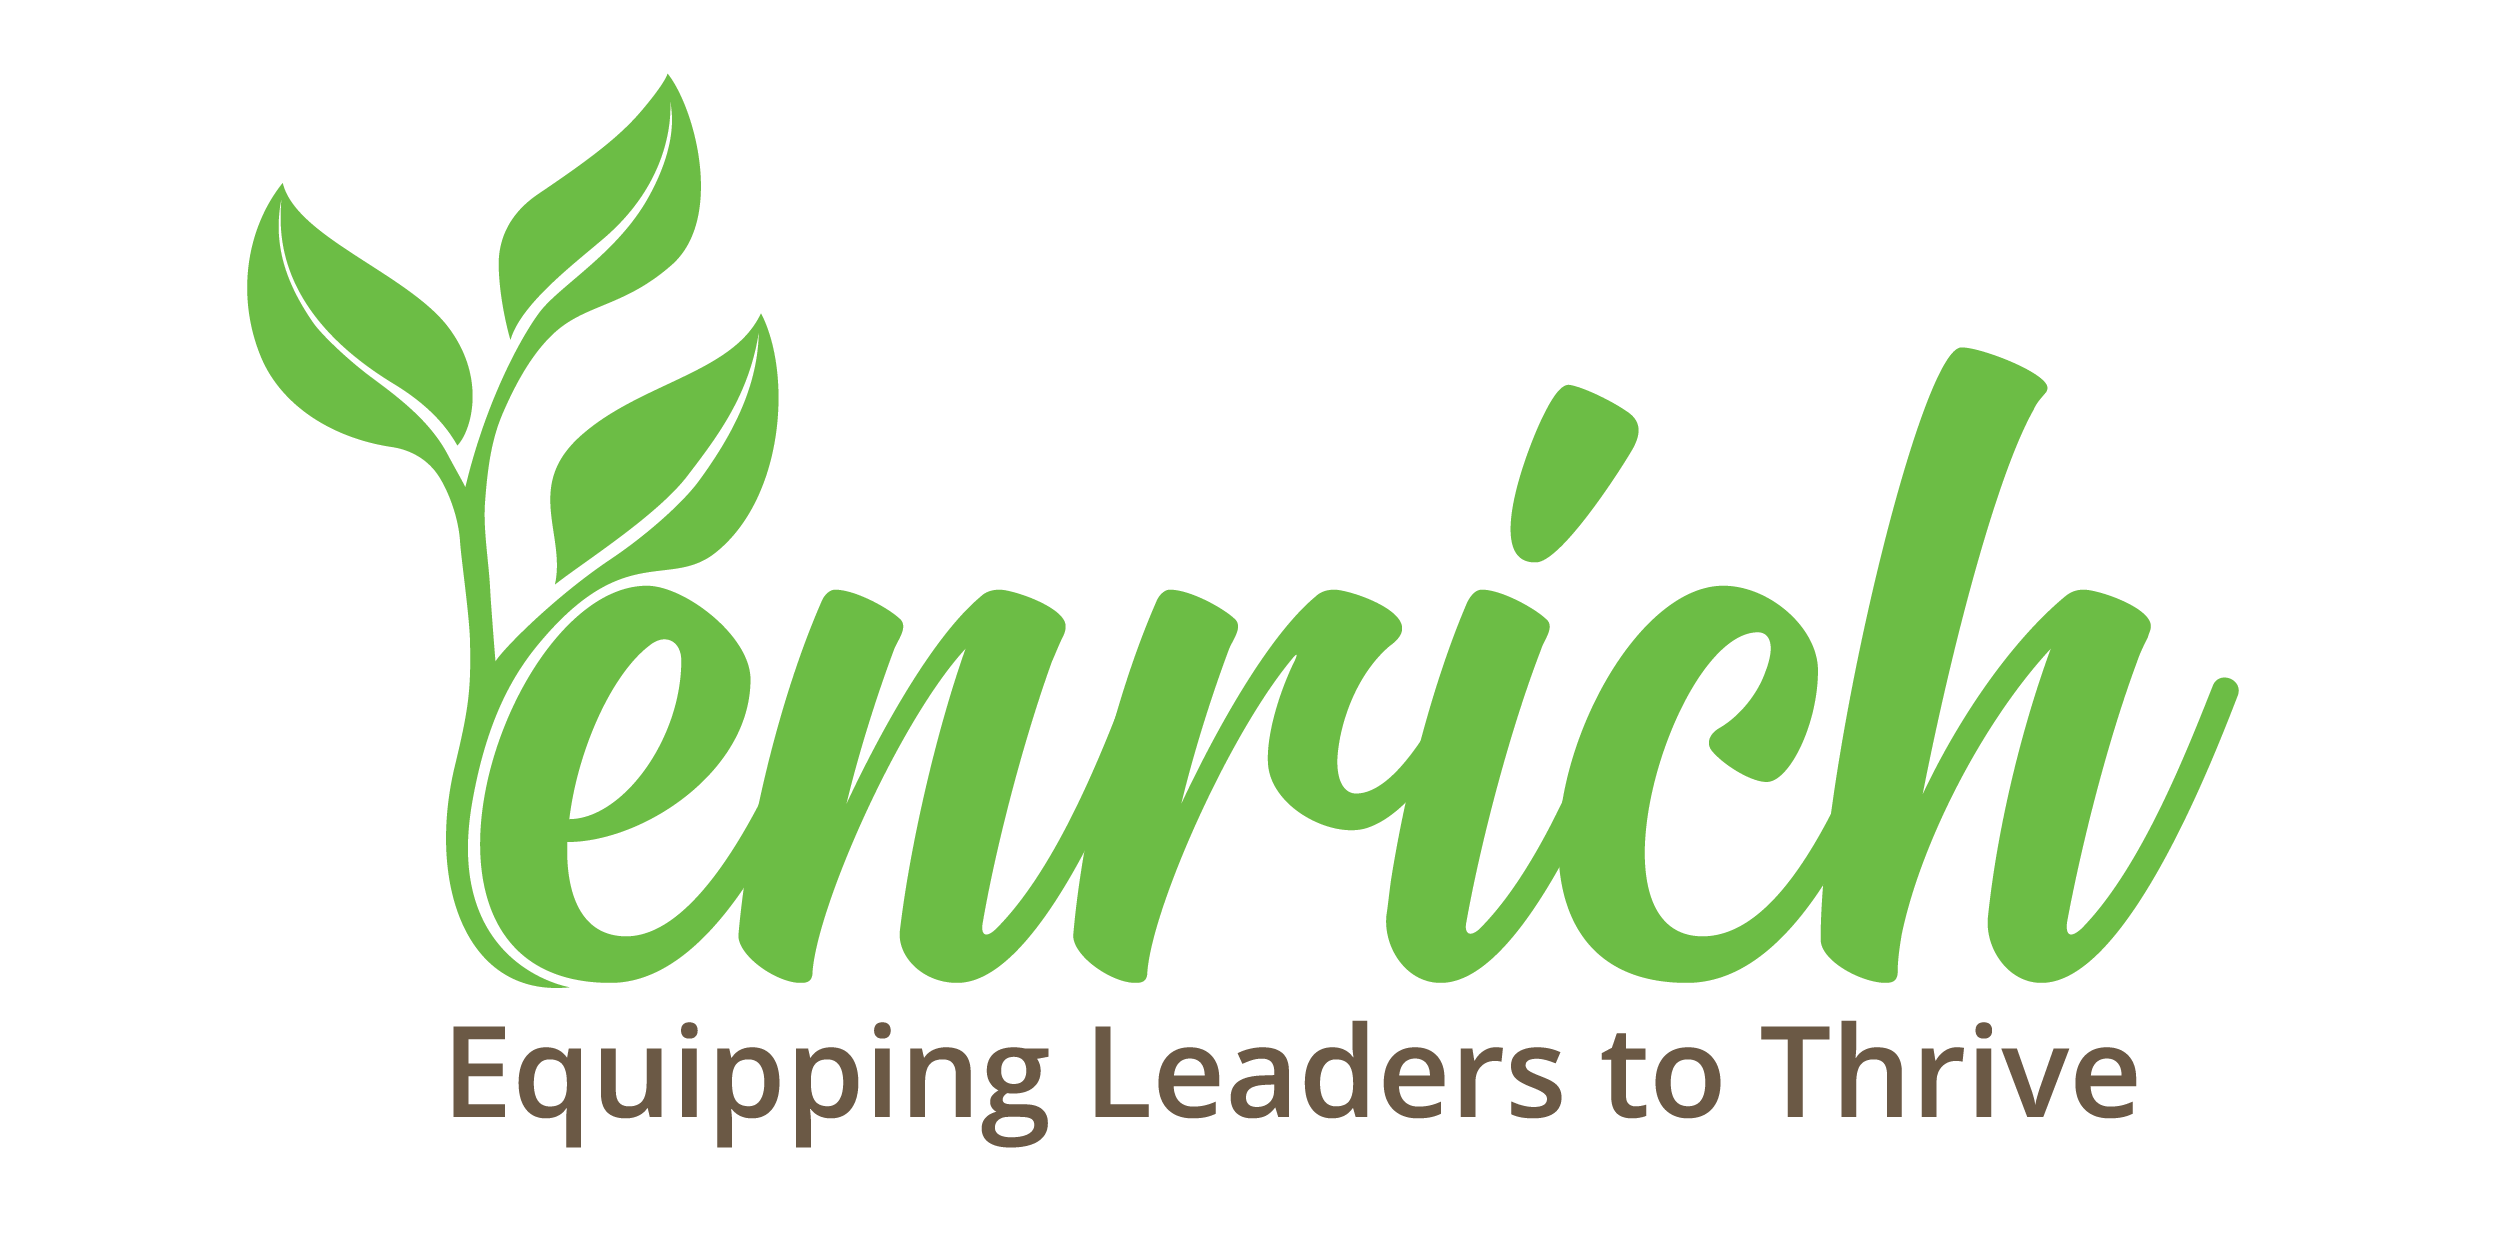 Enrich - Equipping Leaders to Thrive